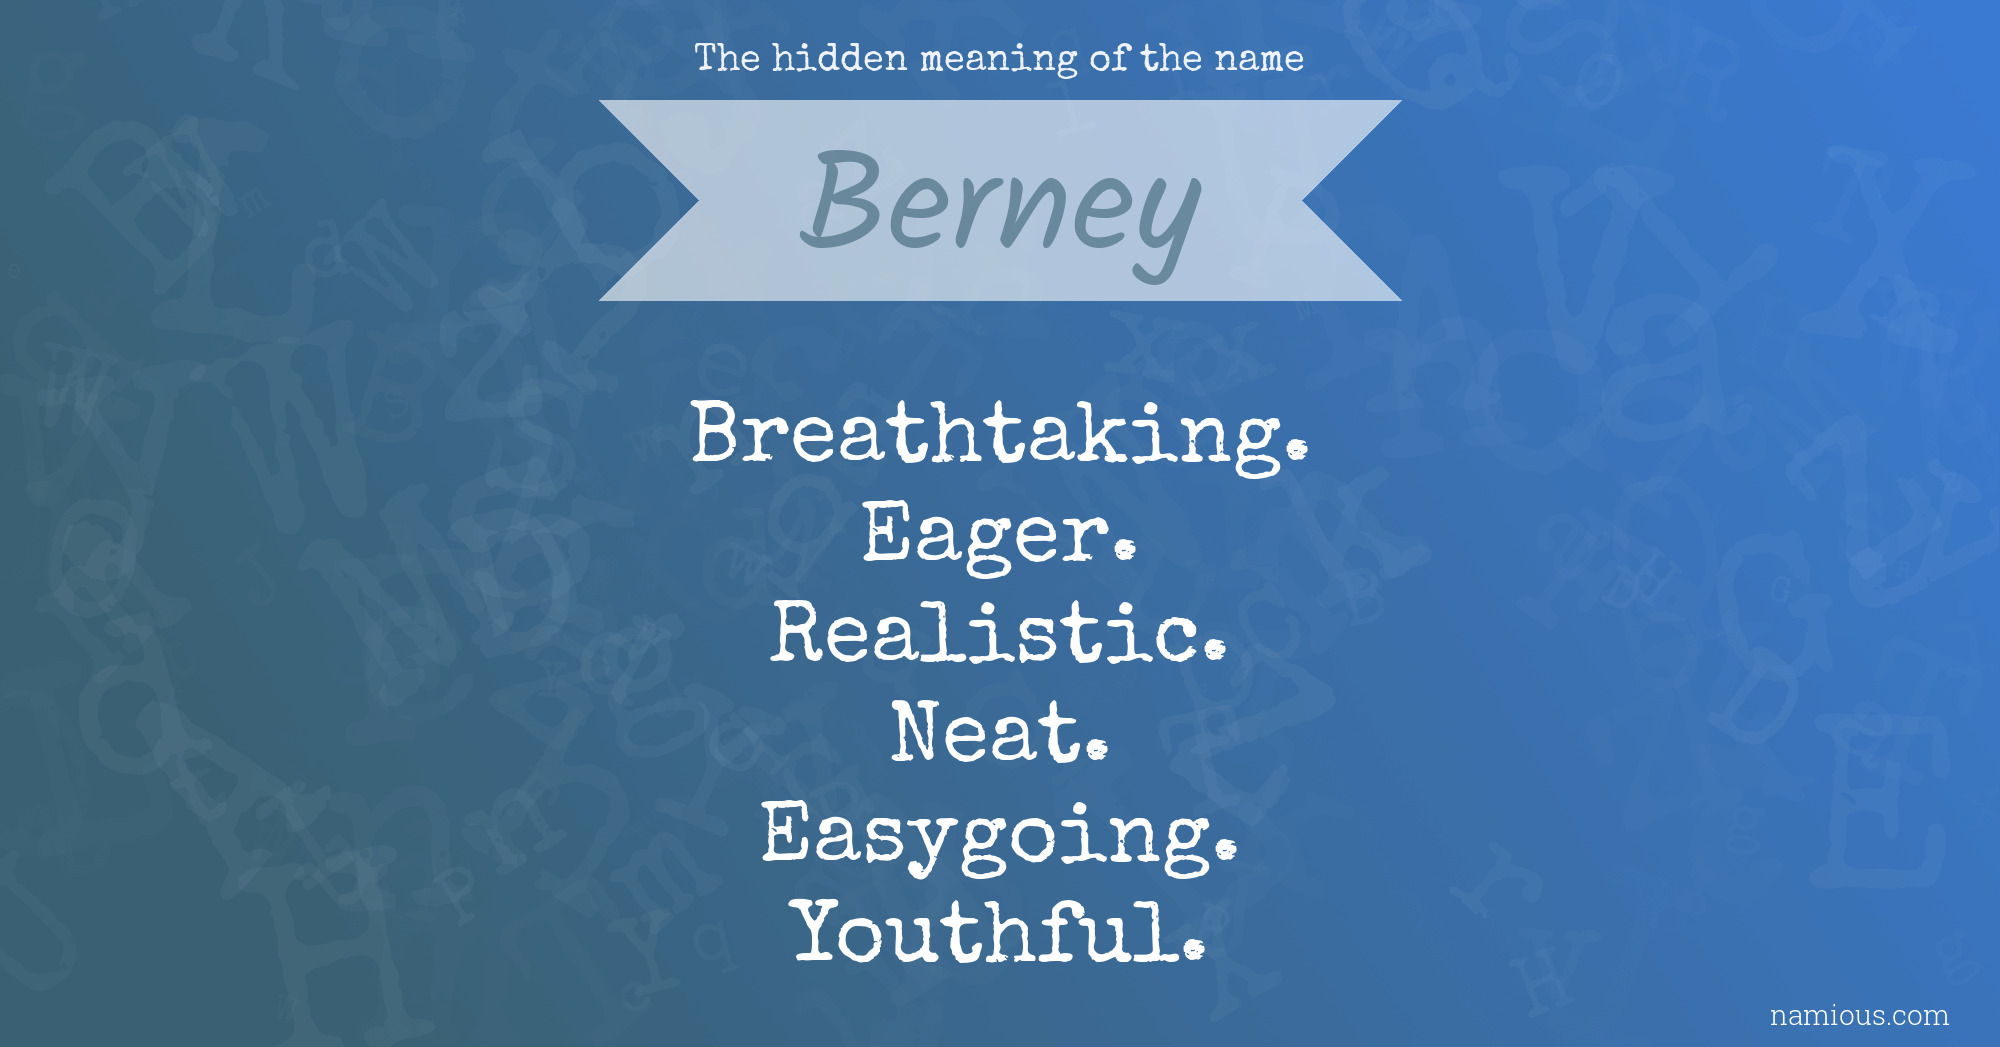 The hidden meaning of the name Berney